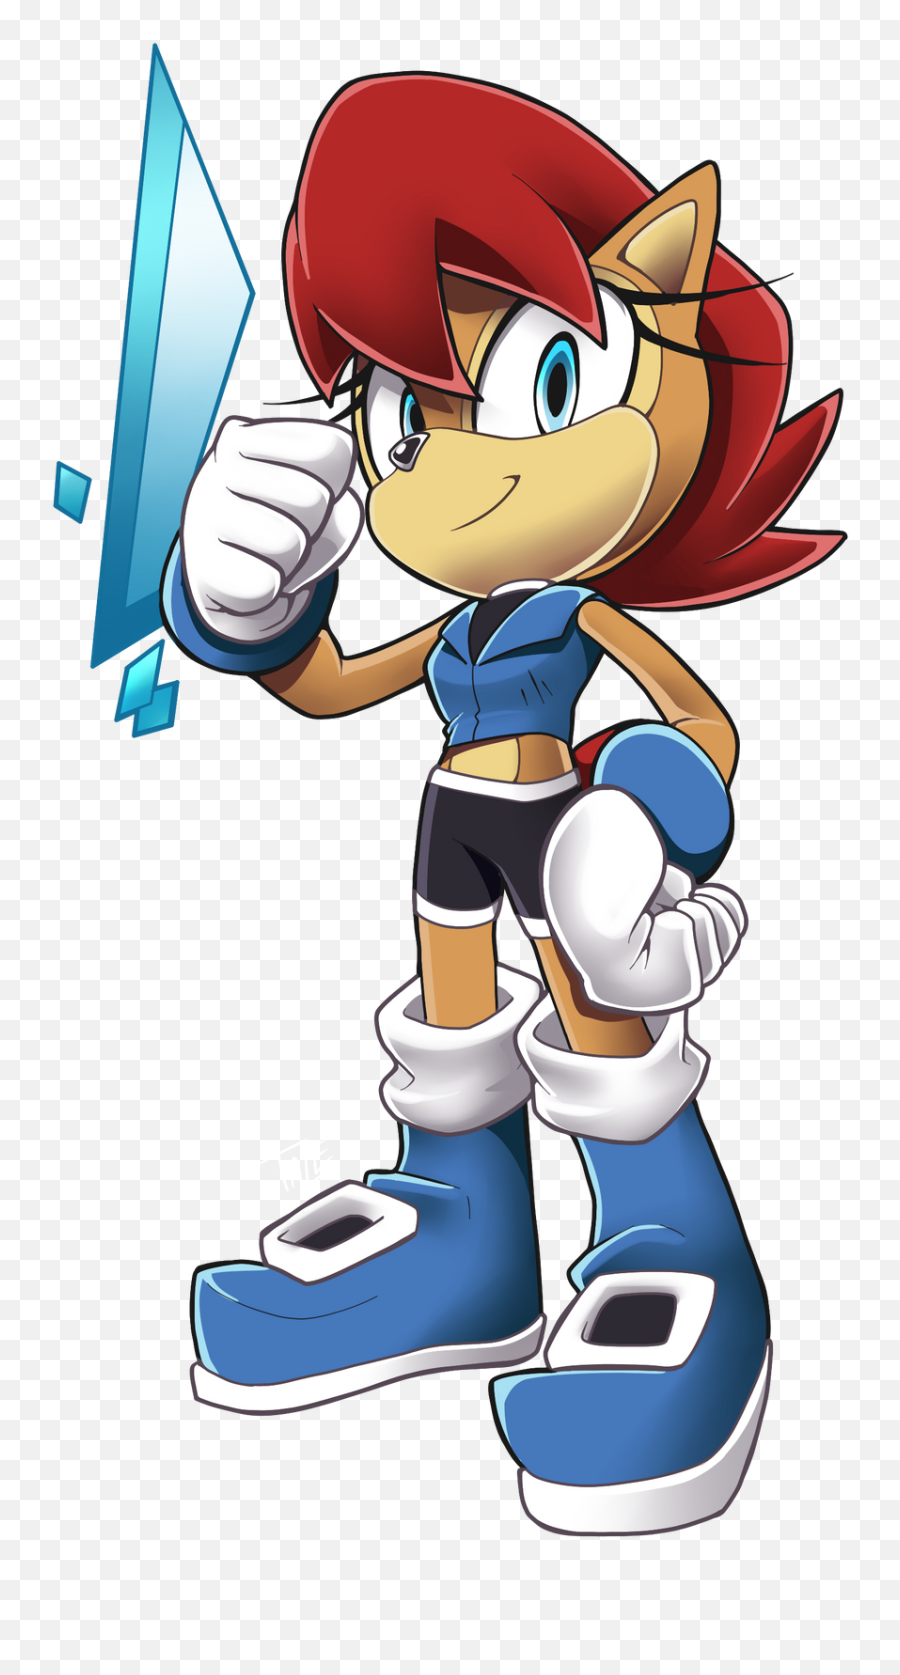 Which Sonic The Hedgehog Comic Do You - Sally Acorn Fan Art Sonic Emoji,Archie No Emotions No Relationships